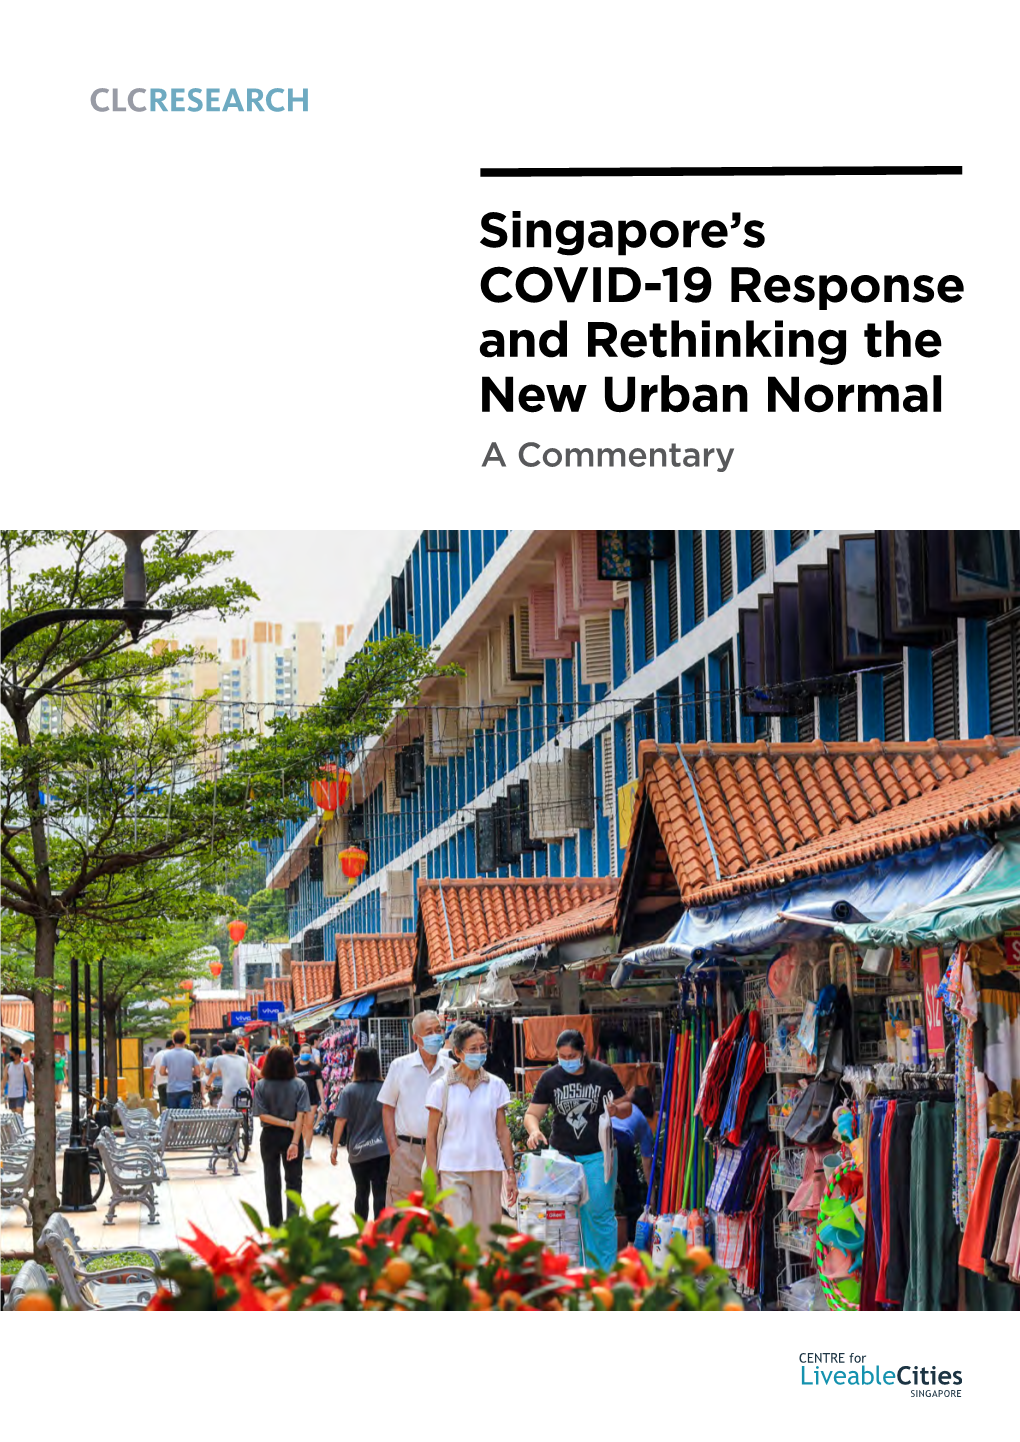 Singapore's COVID-19 Response and Rethinking the New Urban Normal